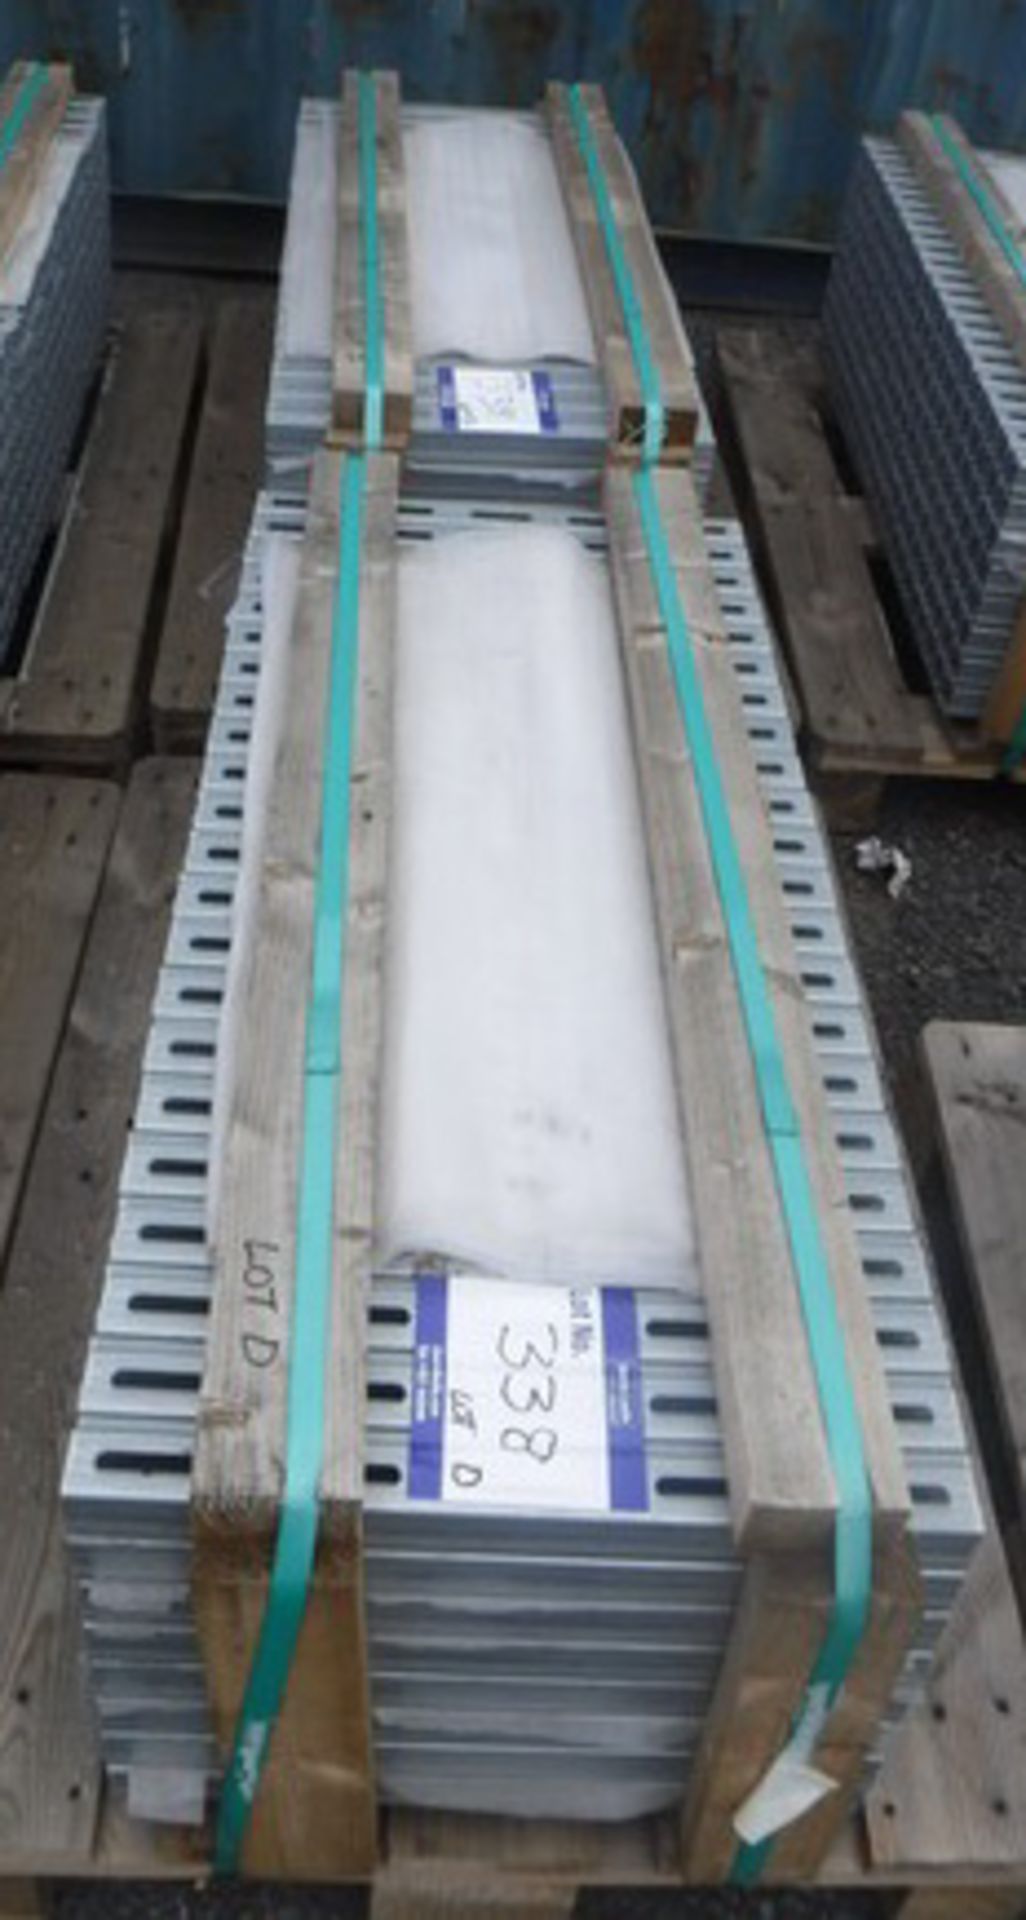 HILTI channel 0.5m long x 2mm - 352 lengths. New, used in construction for shelving.